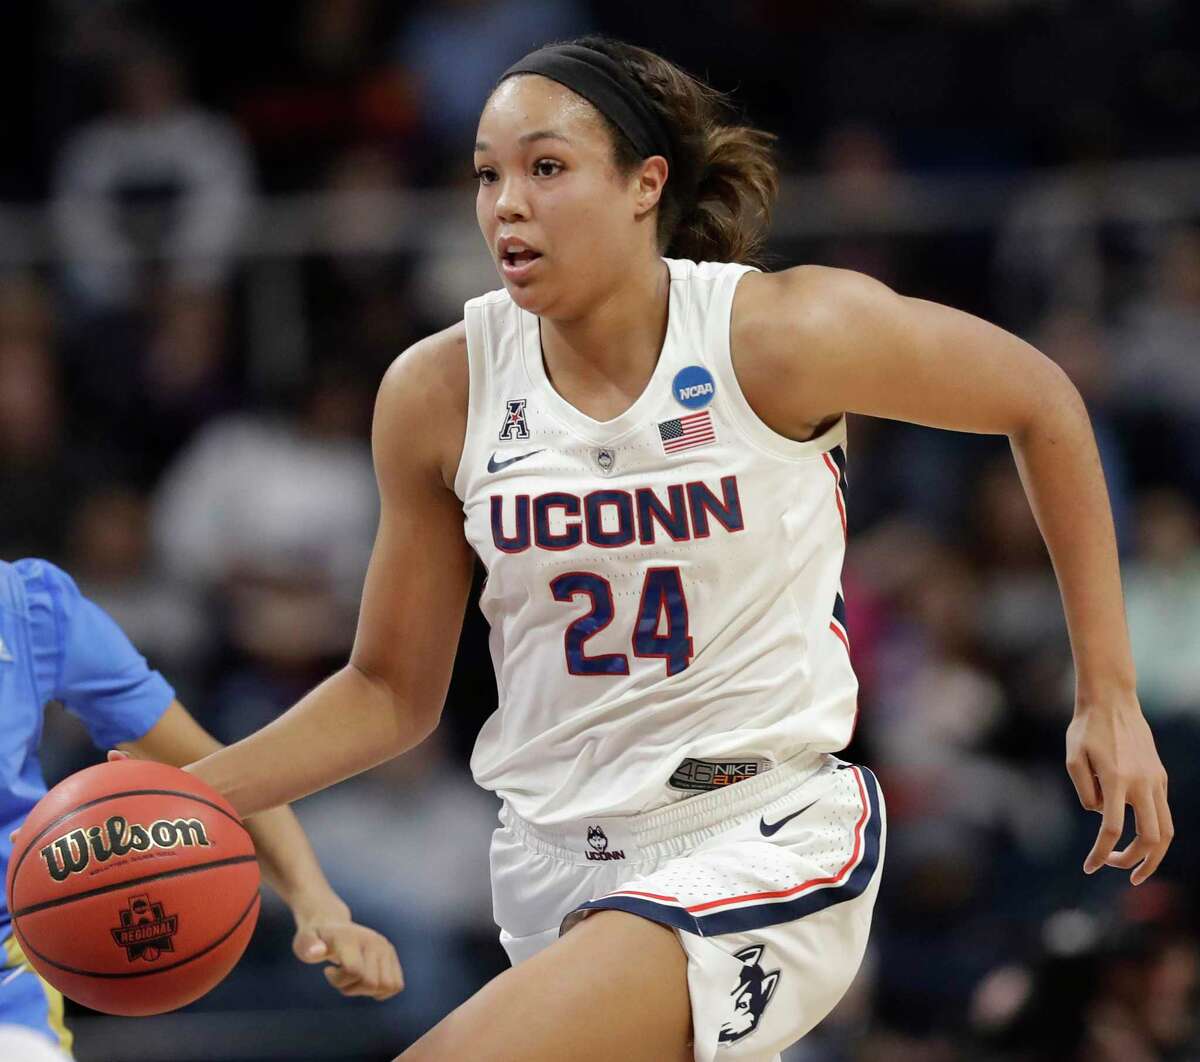 Connecticut forward Napheesa Collier (24) drives down court during the first half of a regional semifinal game in the NCAA women's college basketball tournament, Friday, March 29, 2018, in Albany, N.Y.